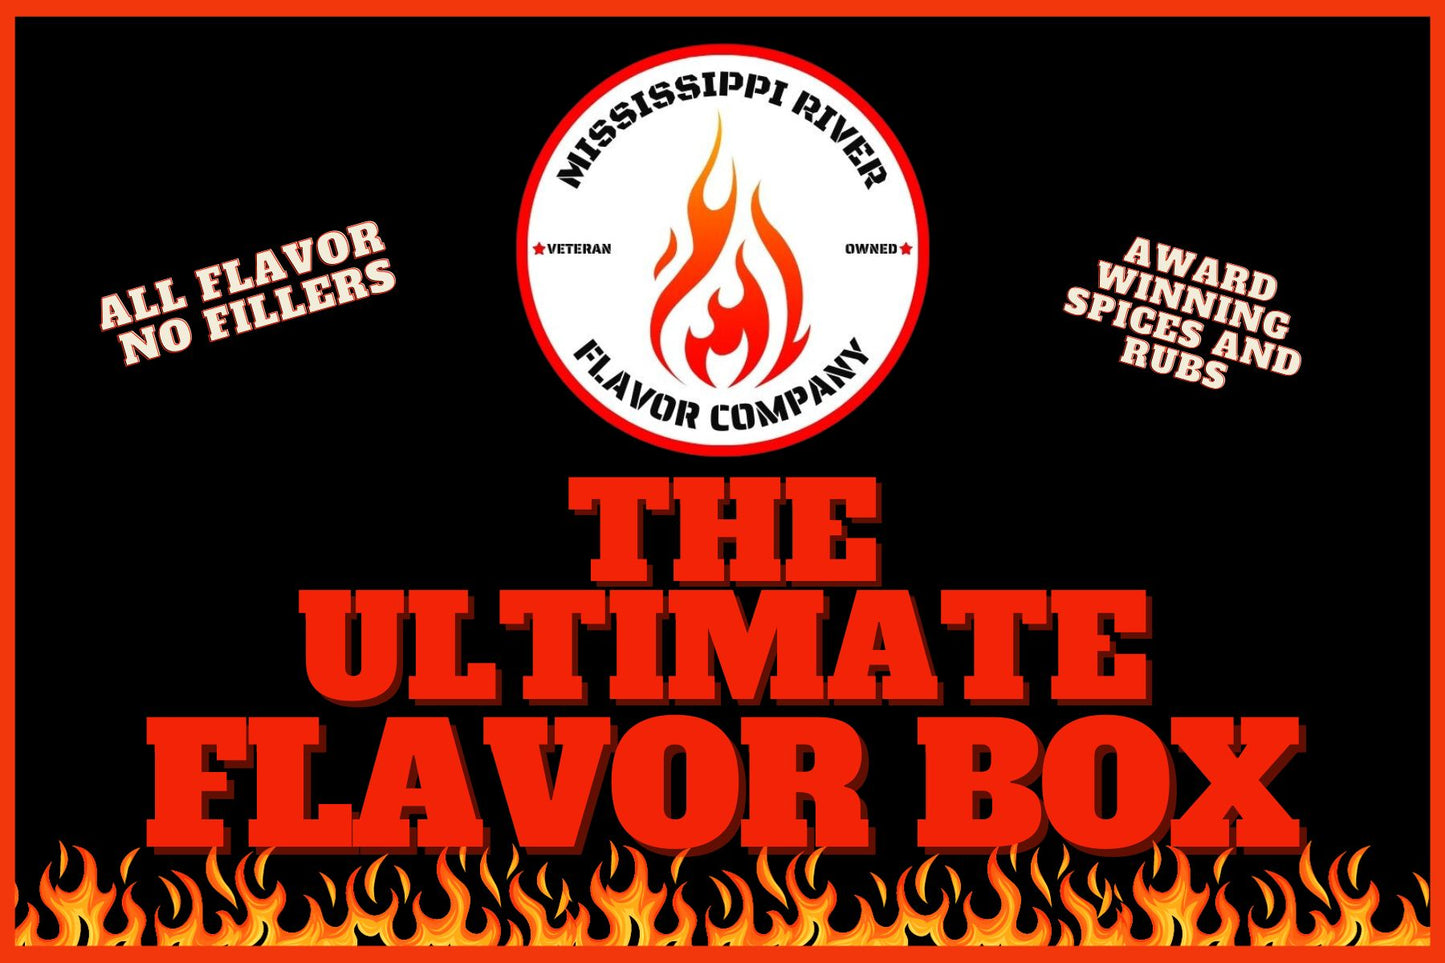 The Ultimate Flavor Box